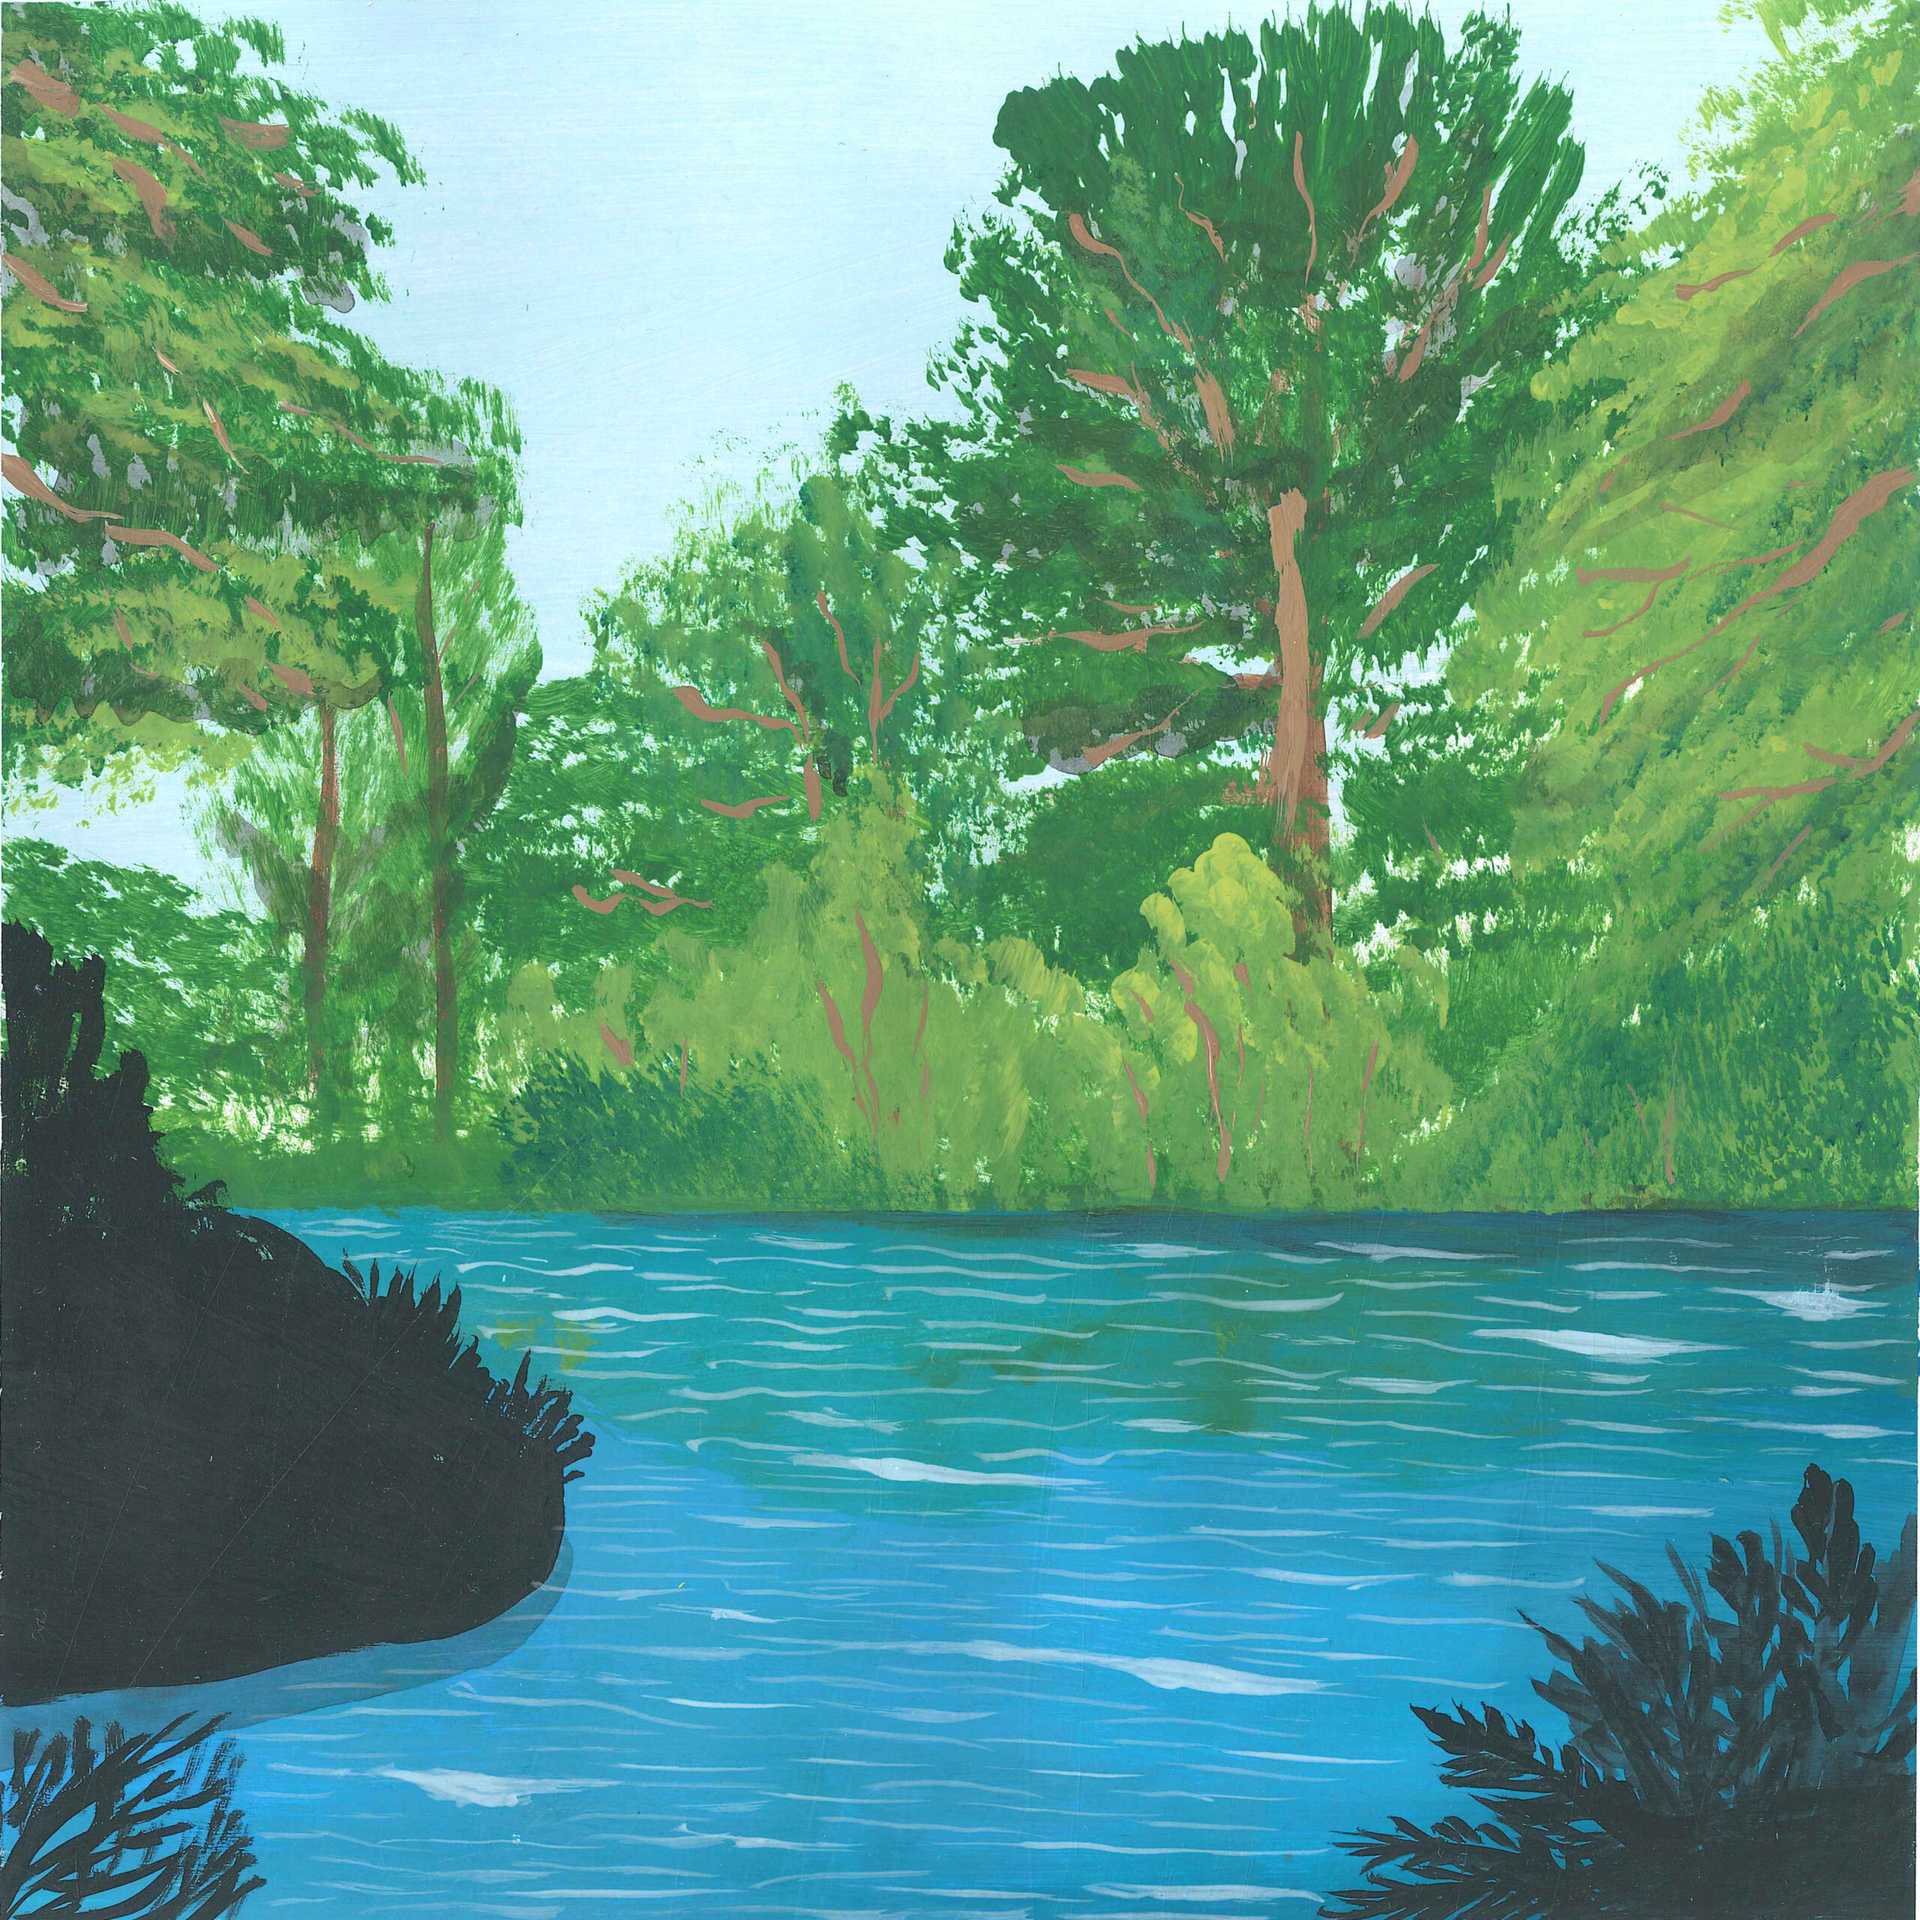 Bats in the Cenote - nature landscape painting - earth.fm